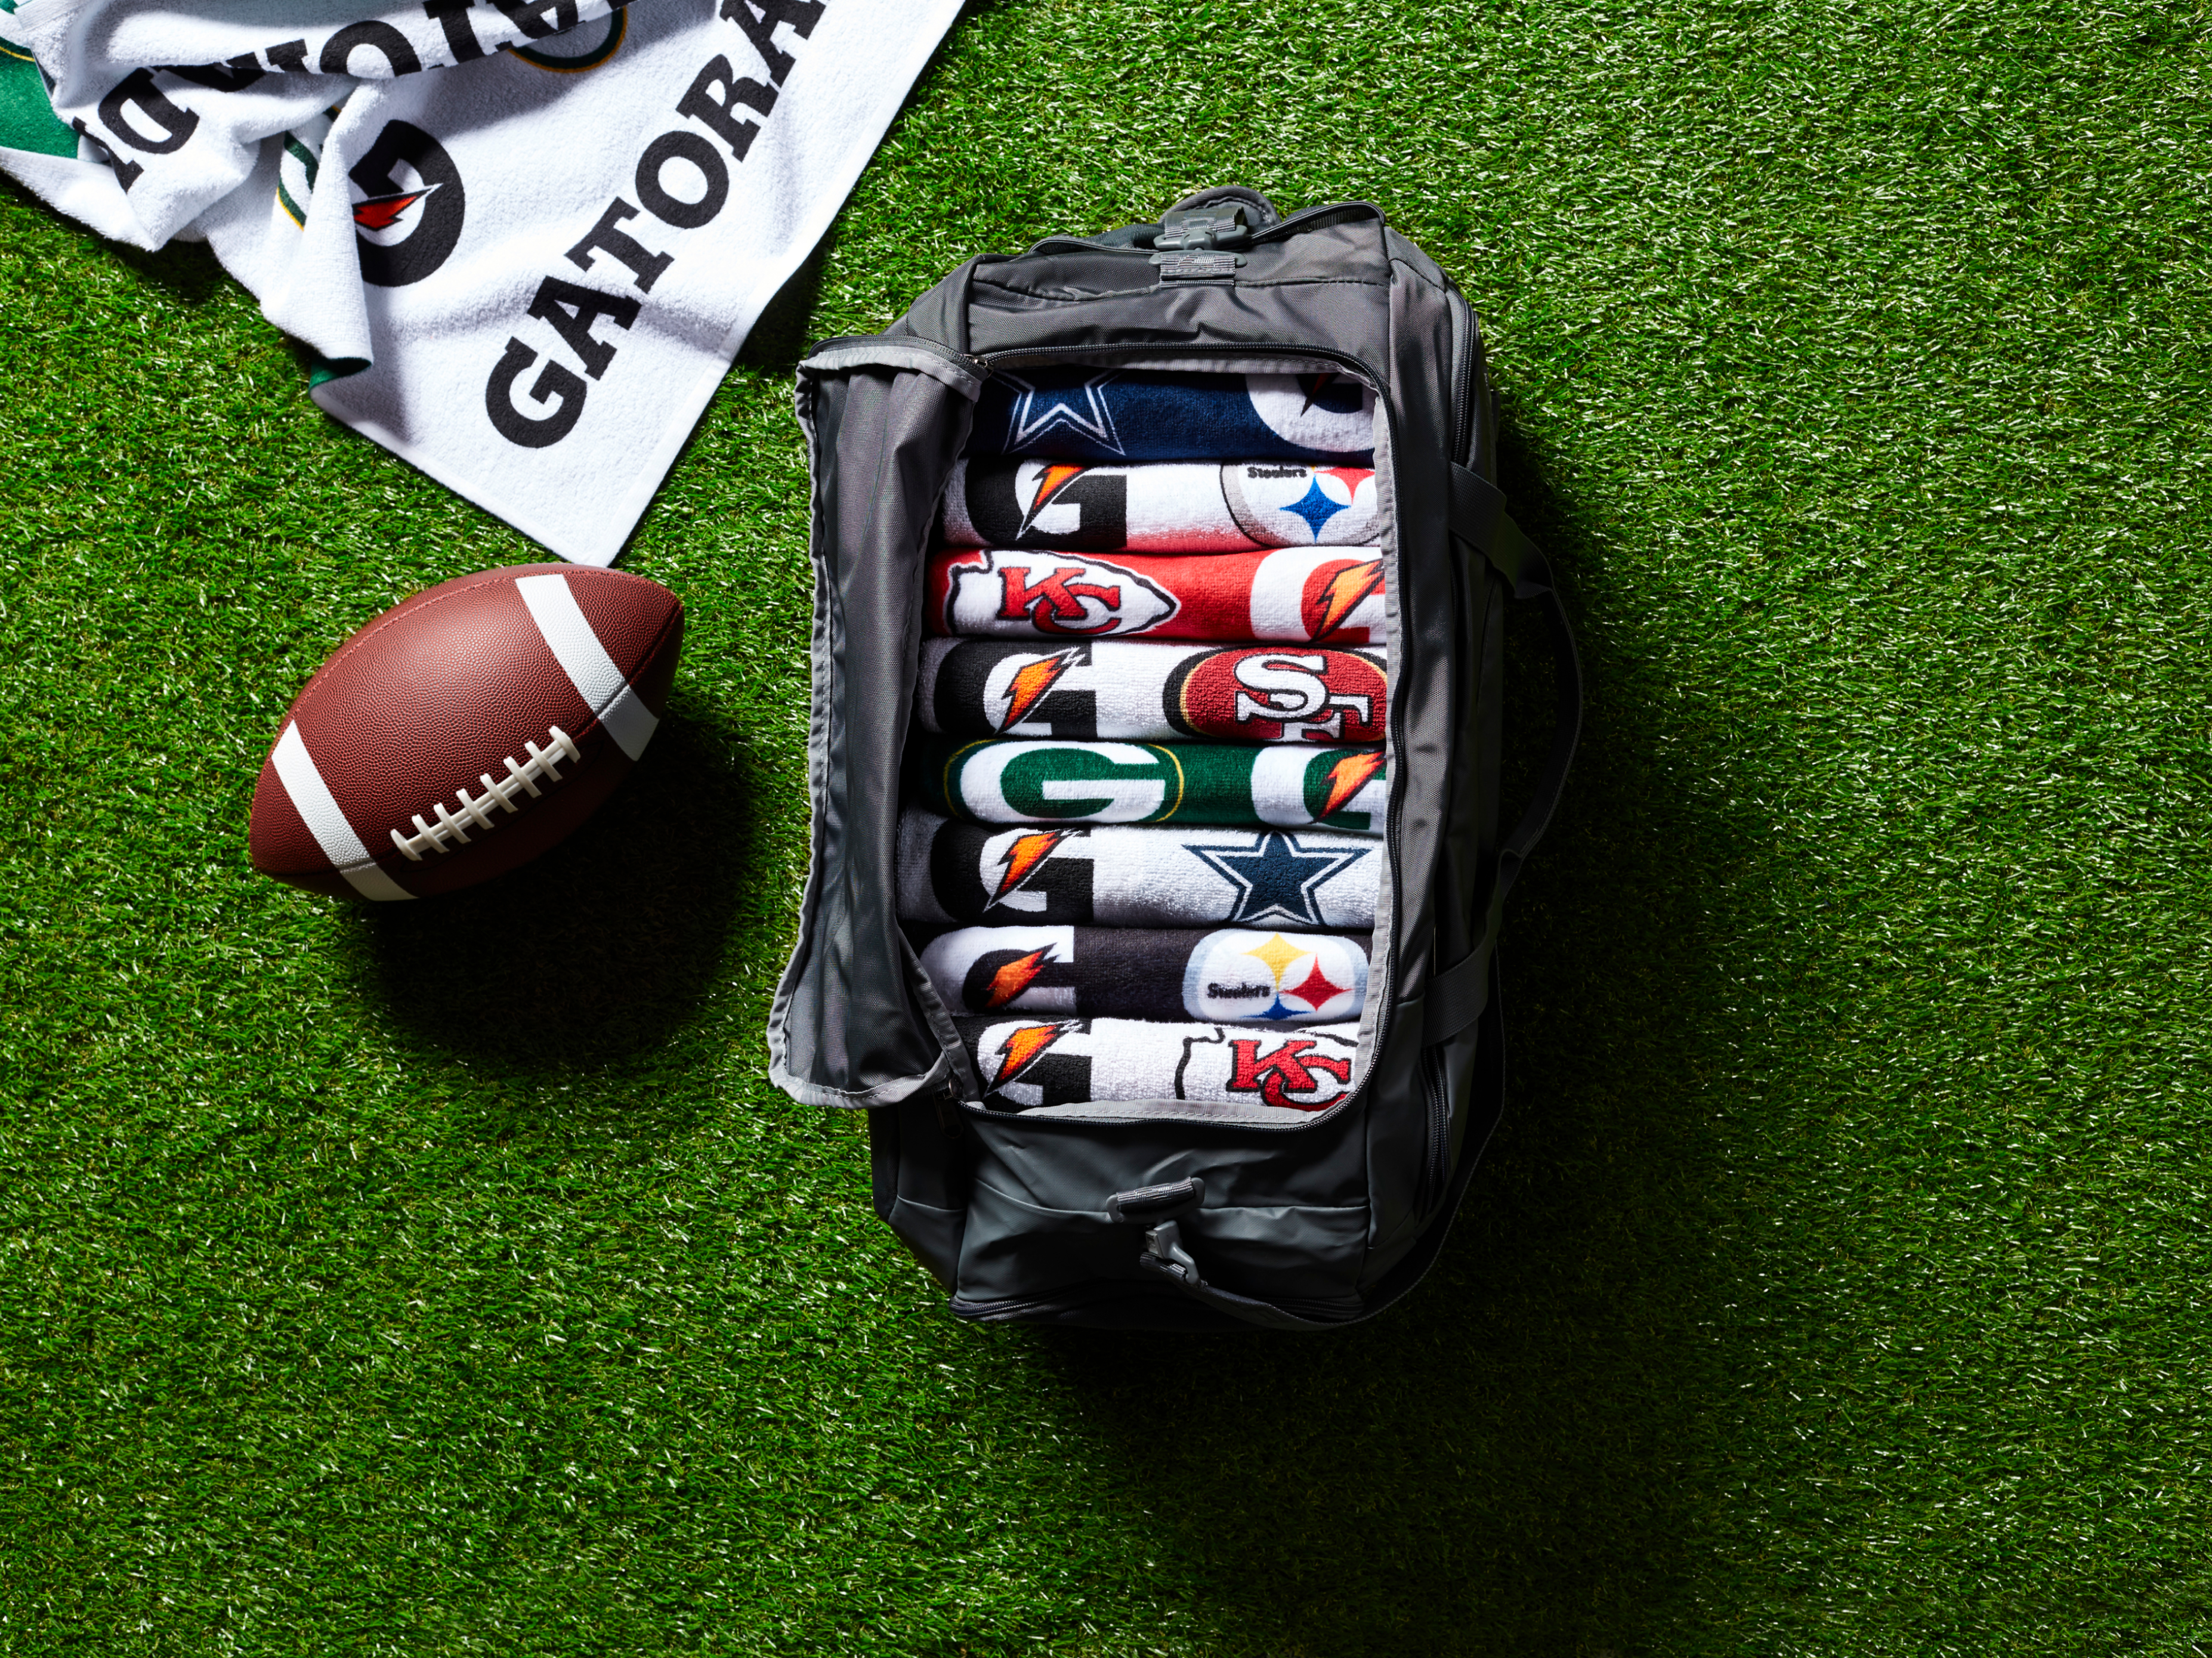 NFL Pro Towels in a gym bag on turf.